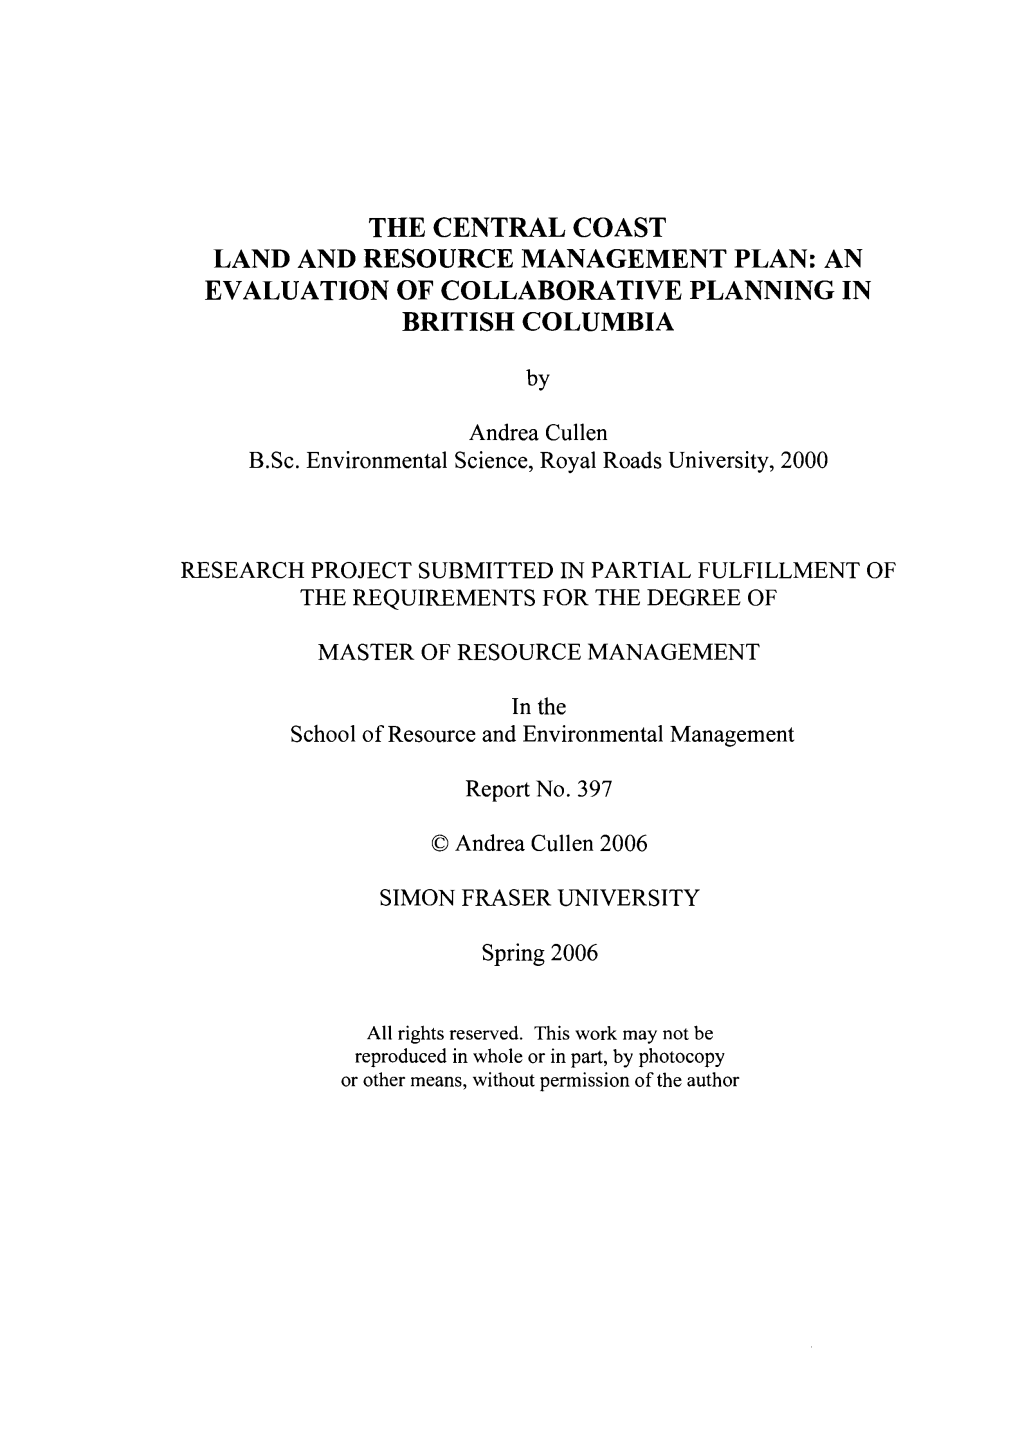 The Central Coast Land and Resource Management Plan: an Evaluation of Collaborative Planning in British Columbia